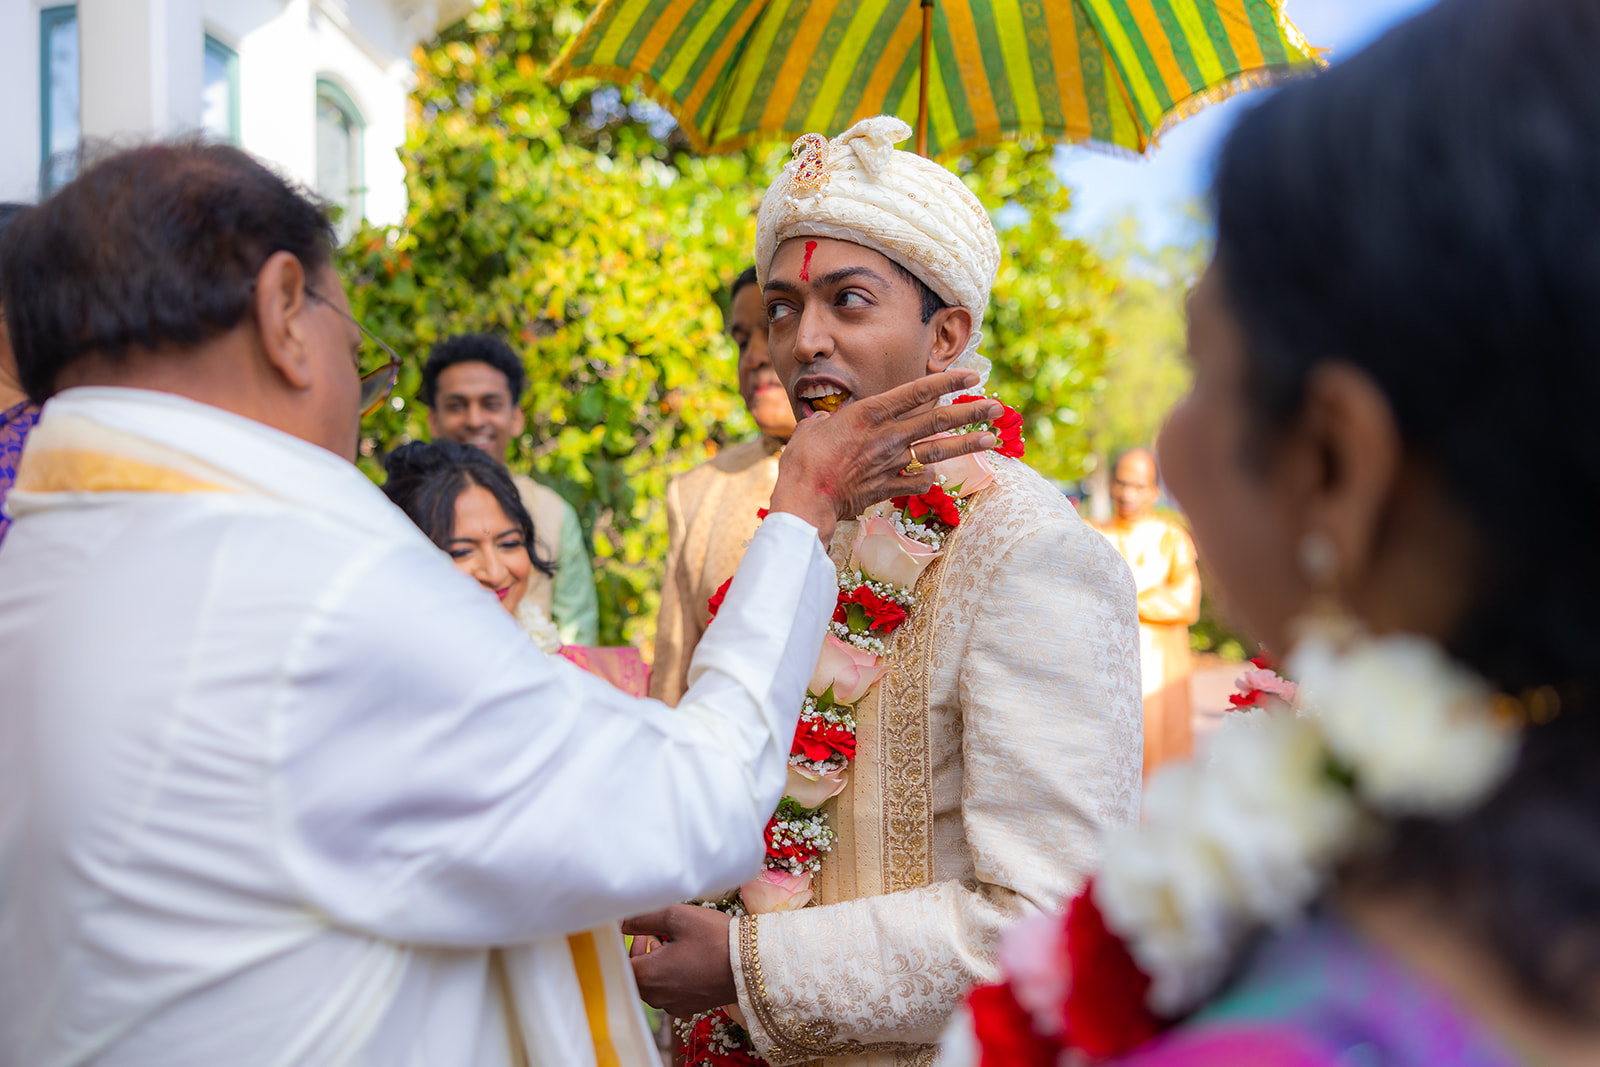 Groom eats fruit in the traditional way.